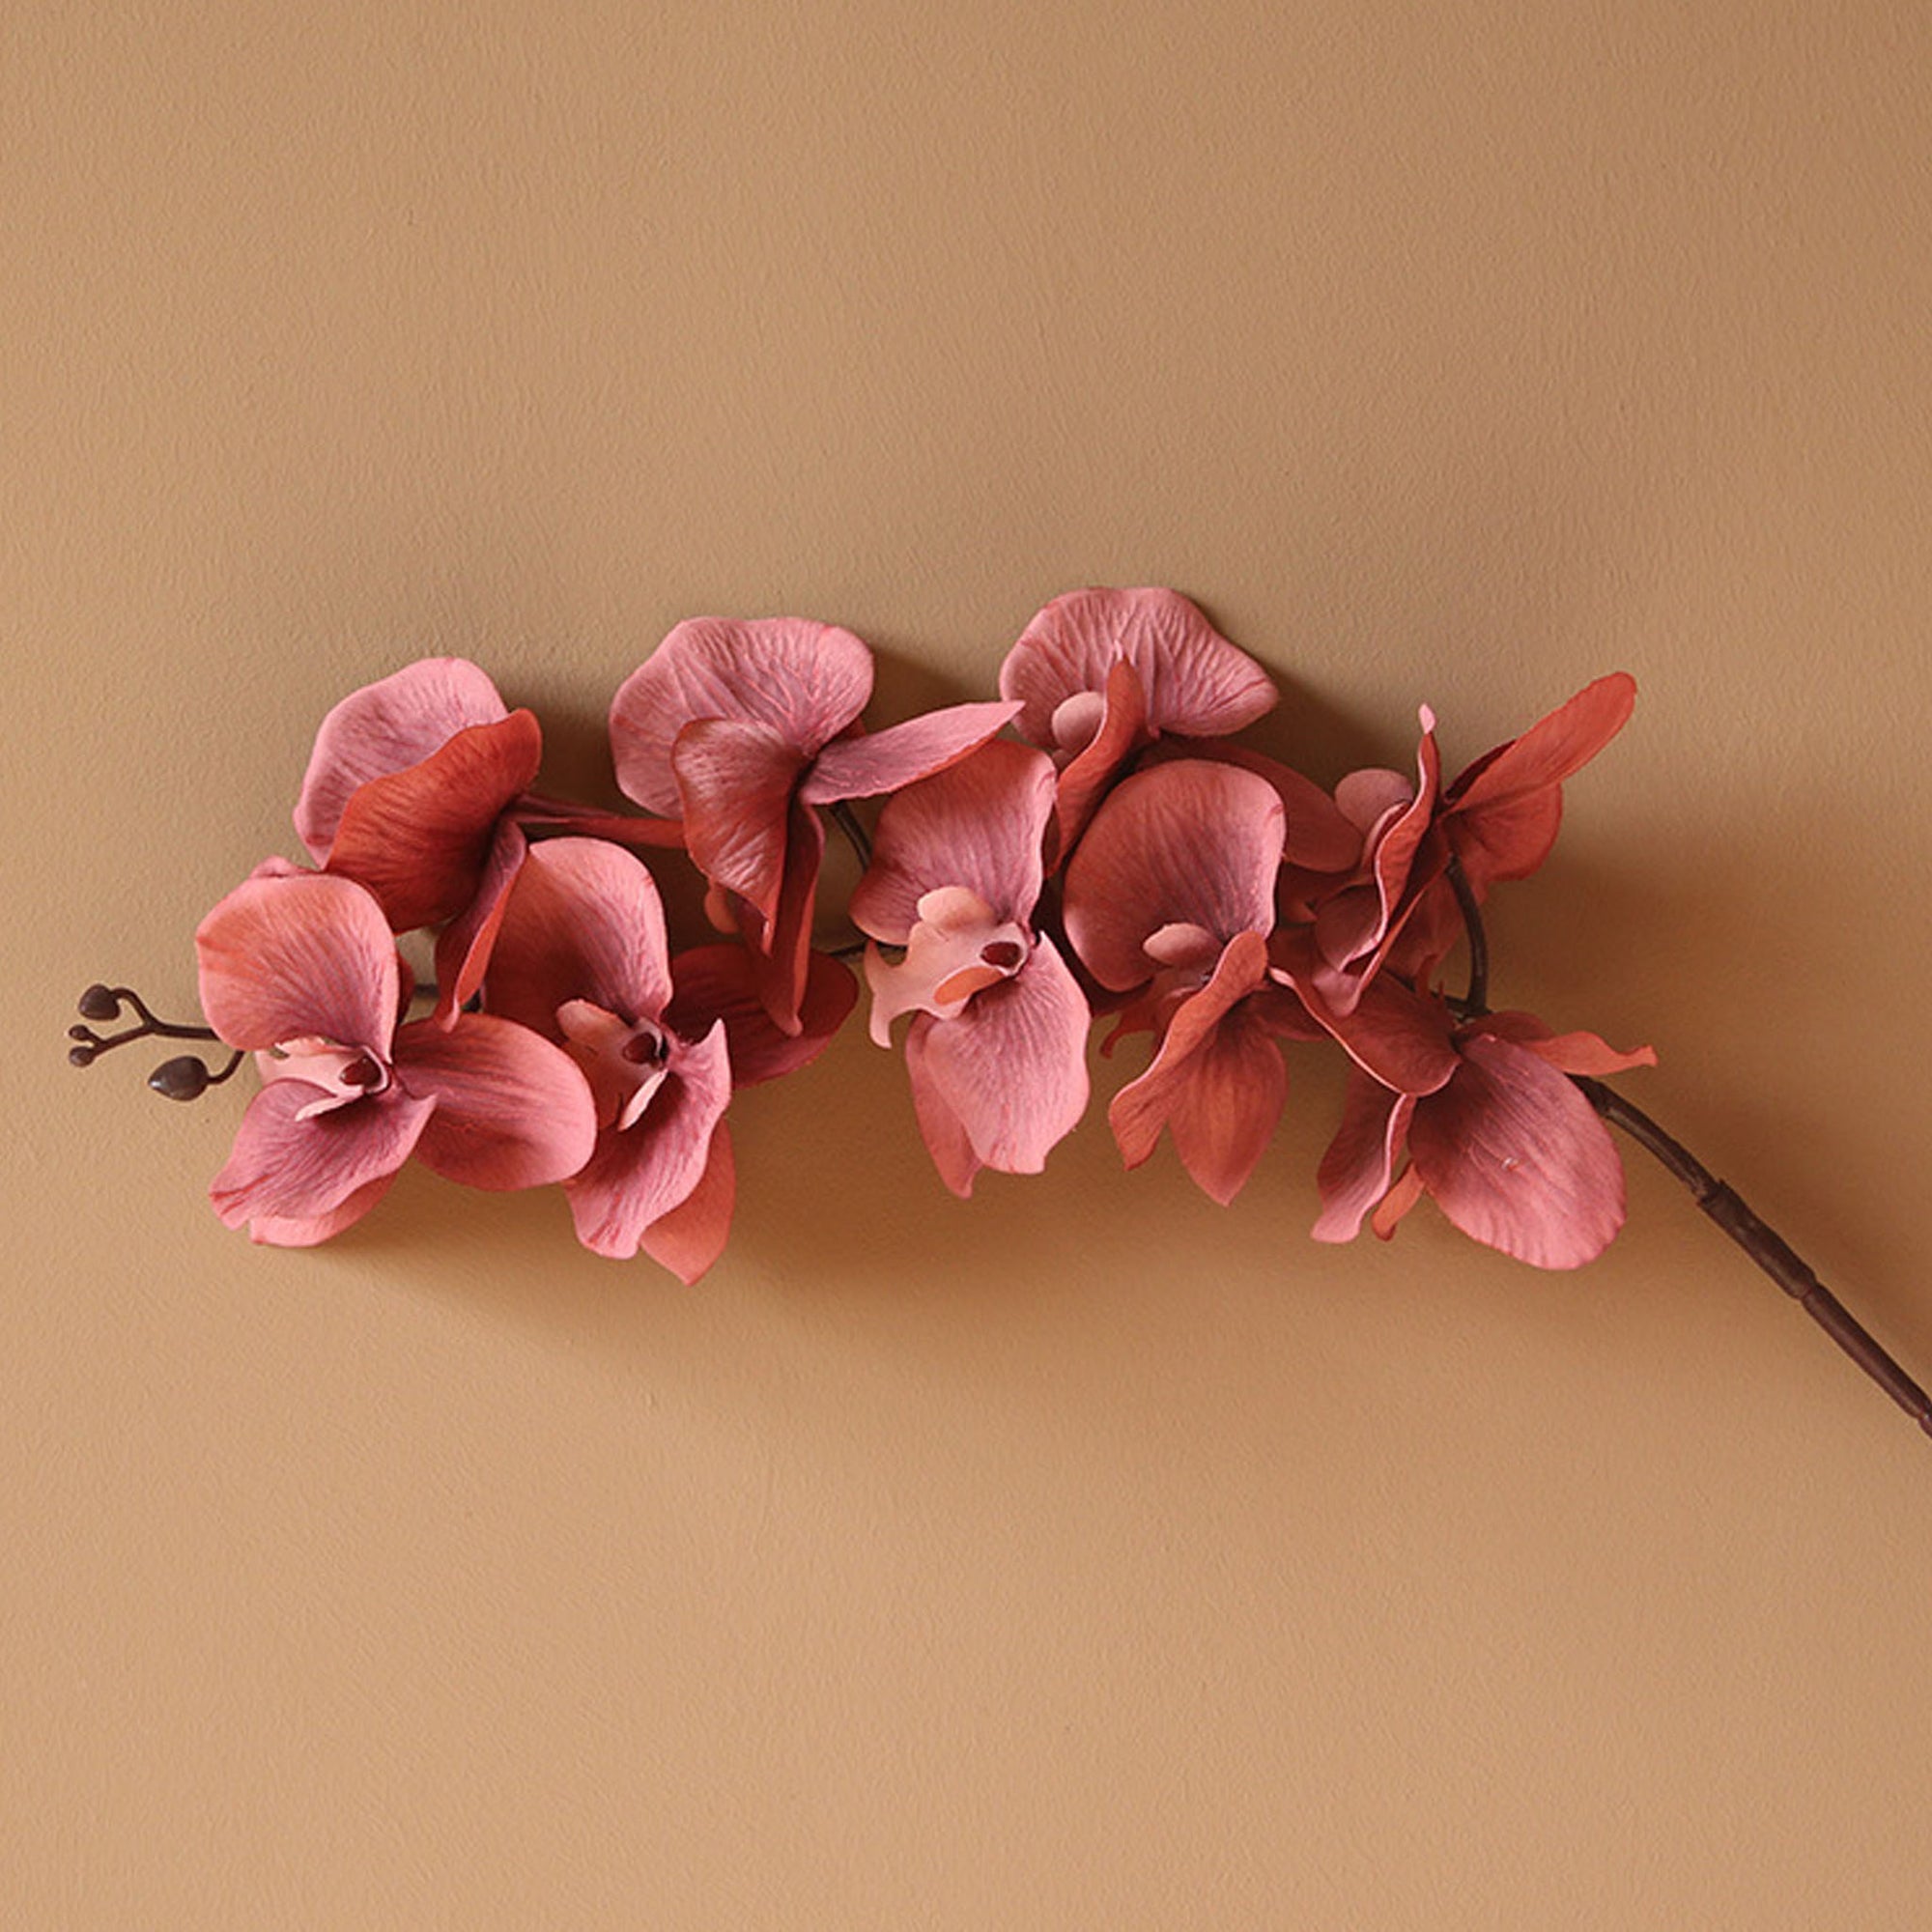 Silk Orchid Artificial Flowers Realistic Phalaenopsis